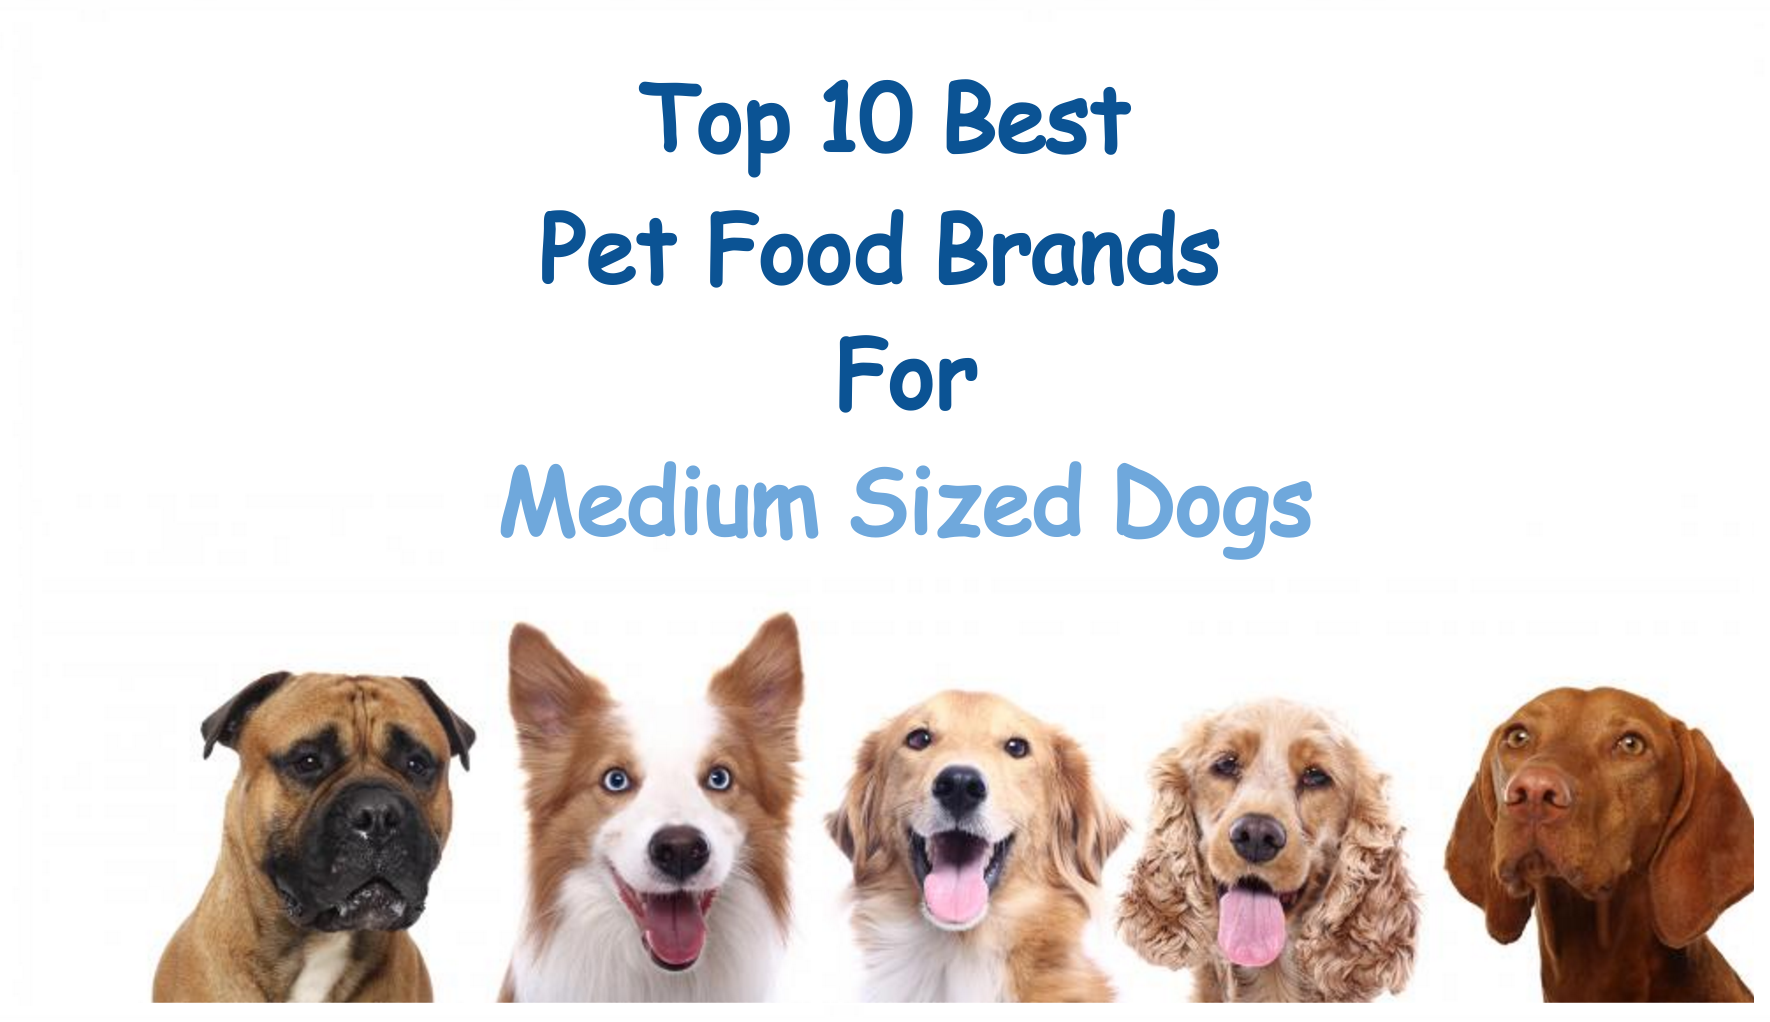 Top 10 Dog Food Brands for Medium Dogs